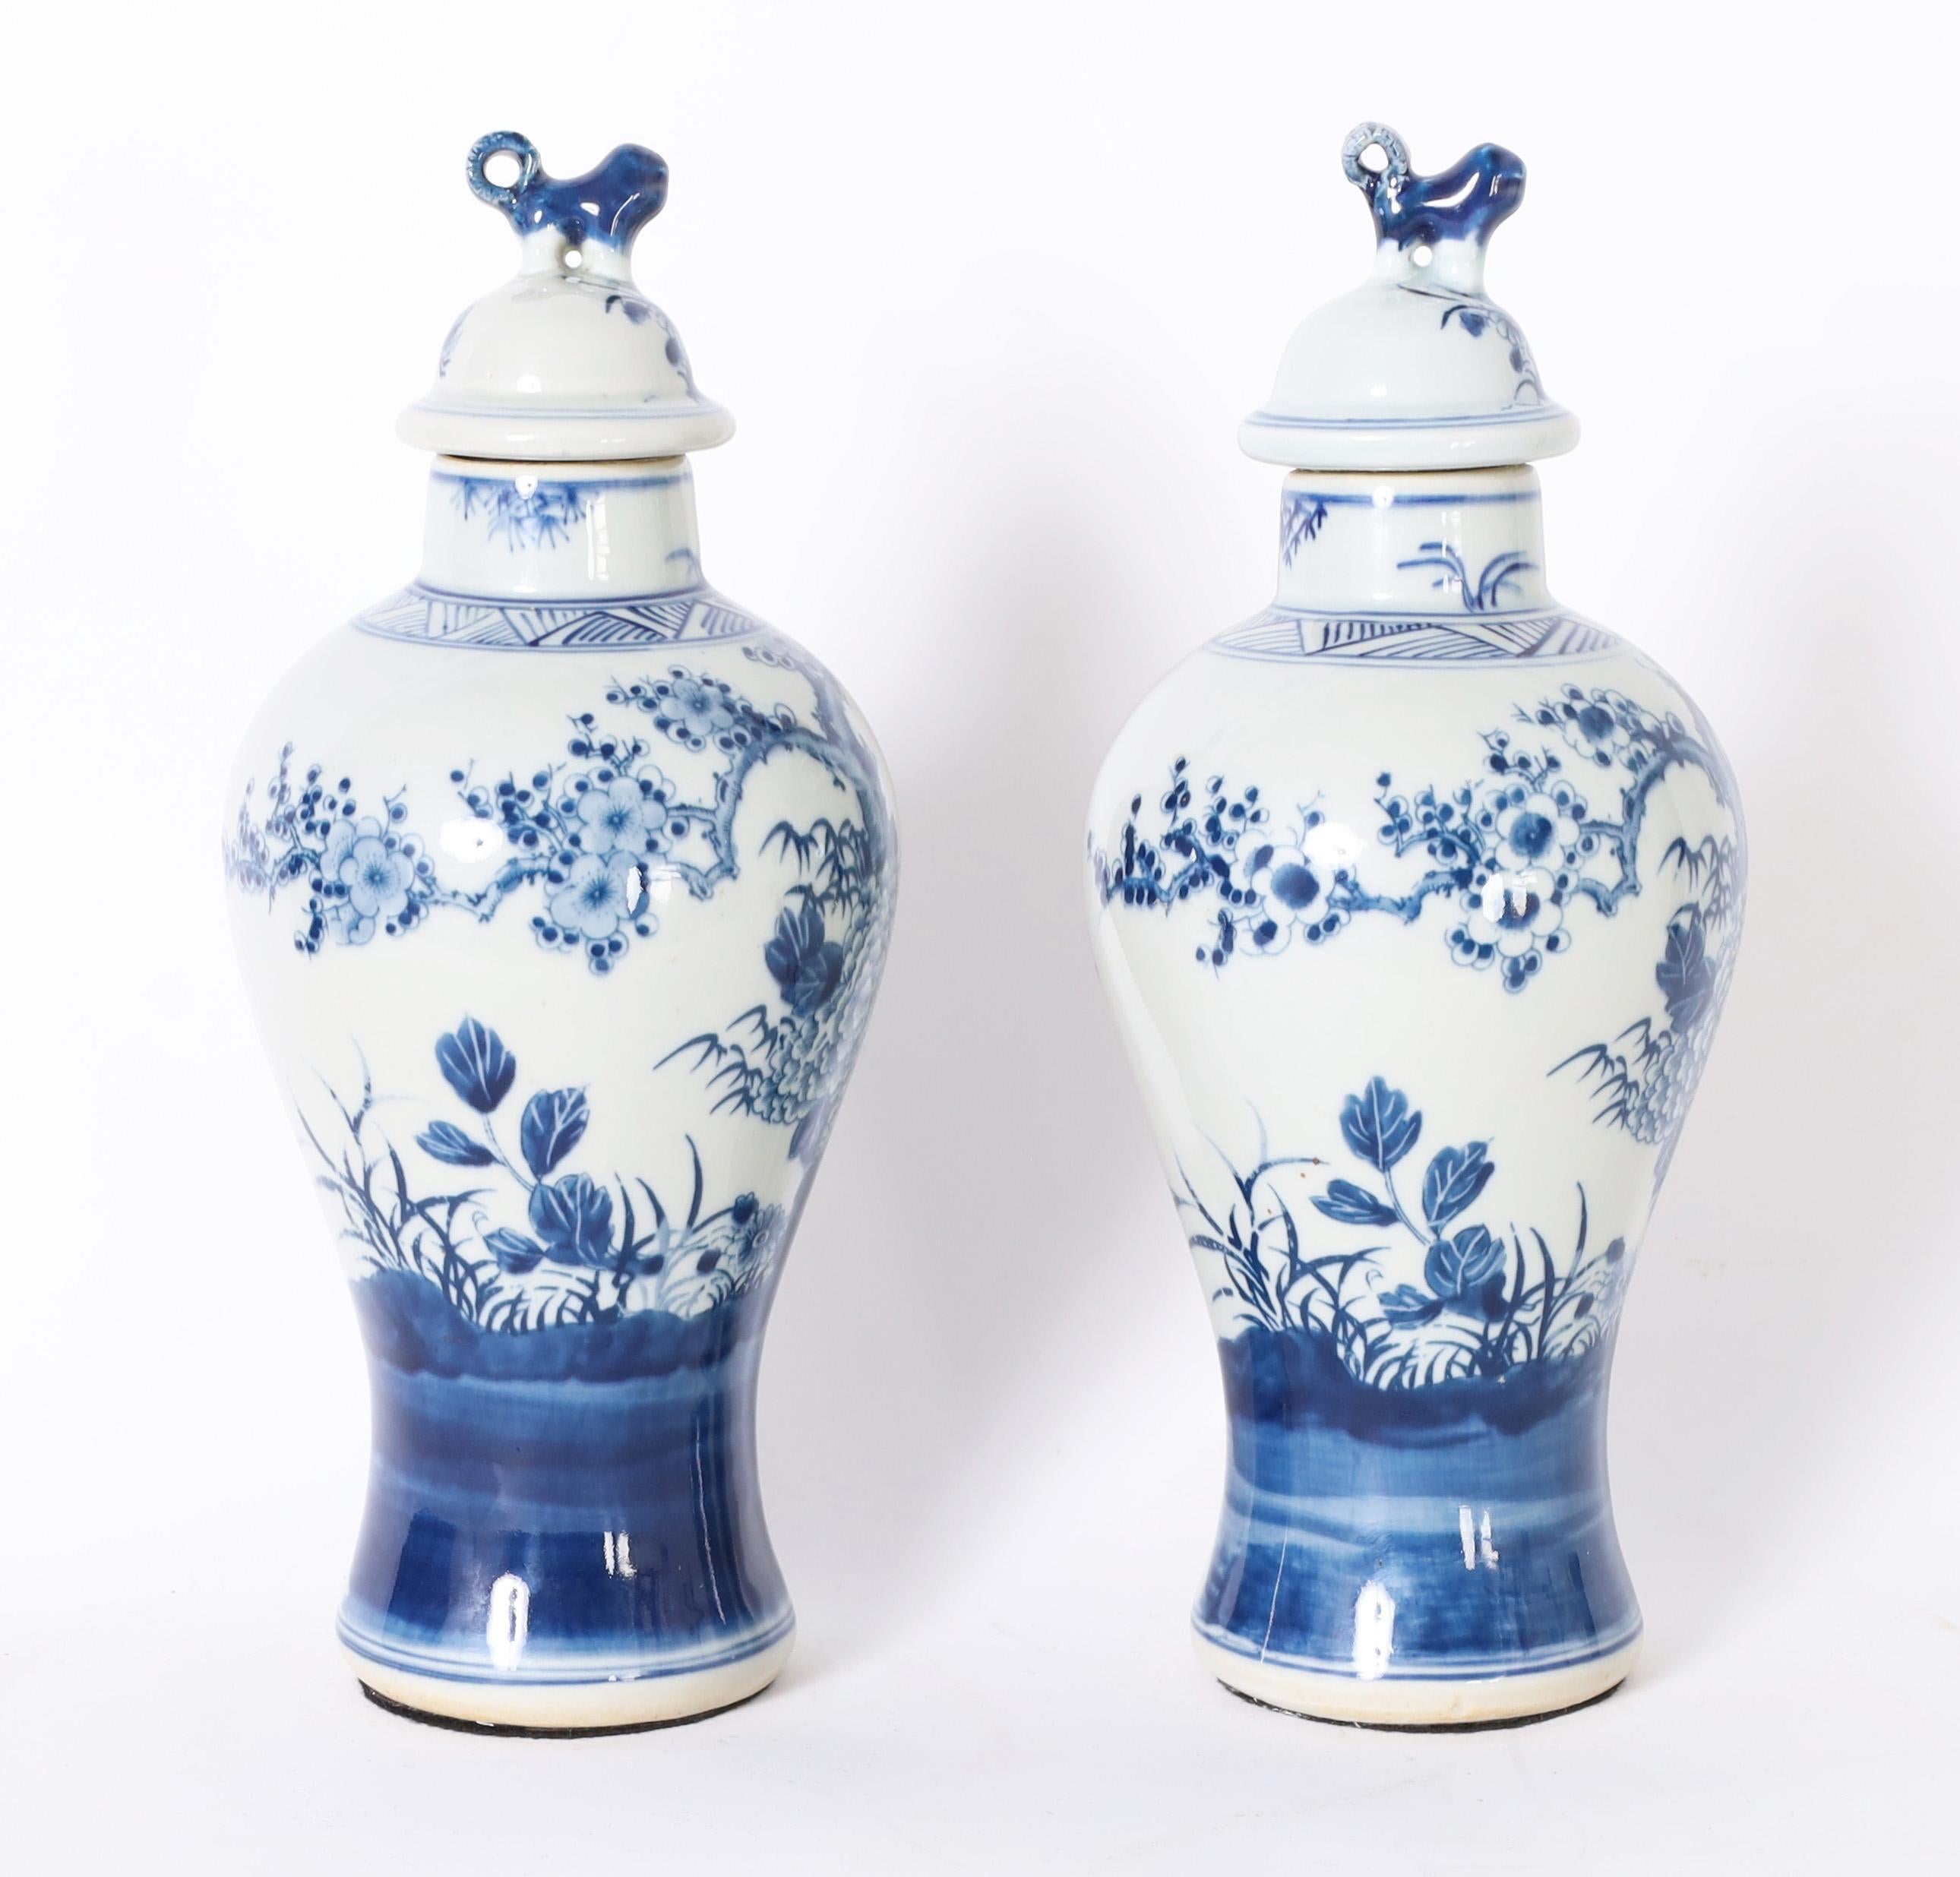 Chinese Export Pair of Blue and White Urns or Jars With Flowers For Sale